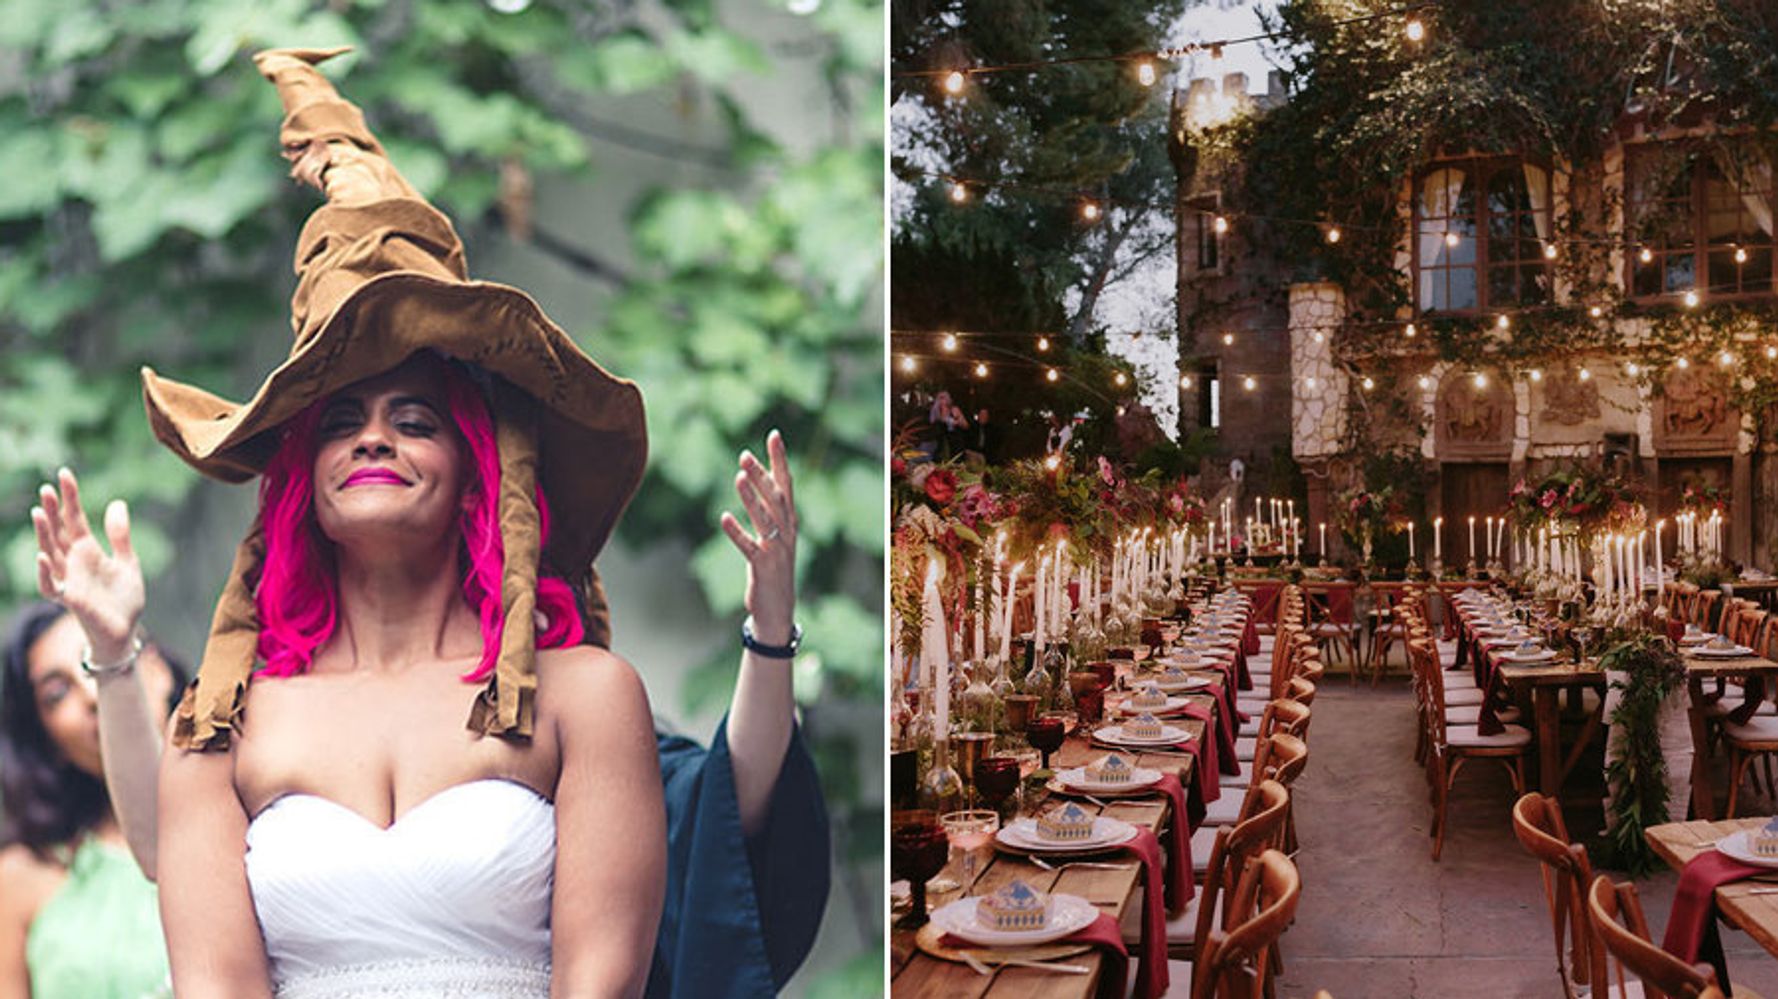 11 Magical Harry Potter Wedding Ideas for a Whimsical Day